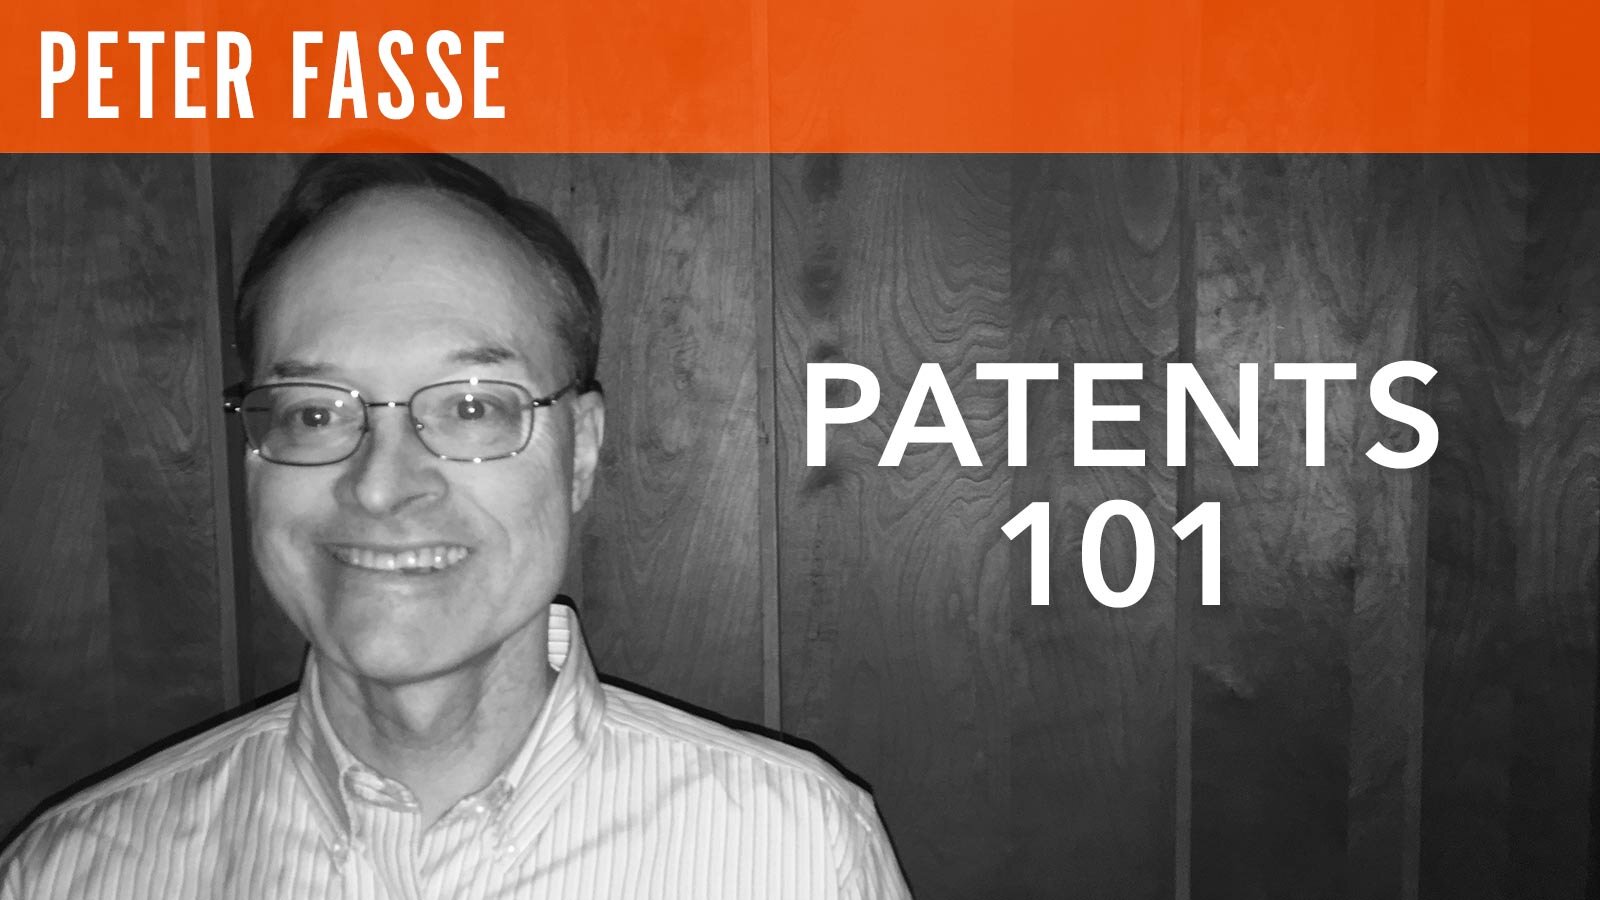 Peter Fasse, "Patents 101"